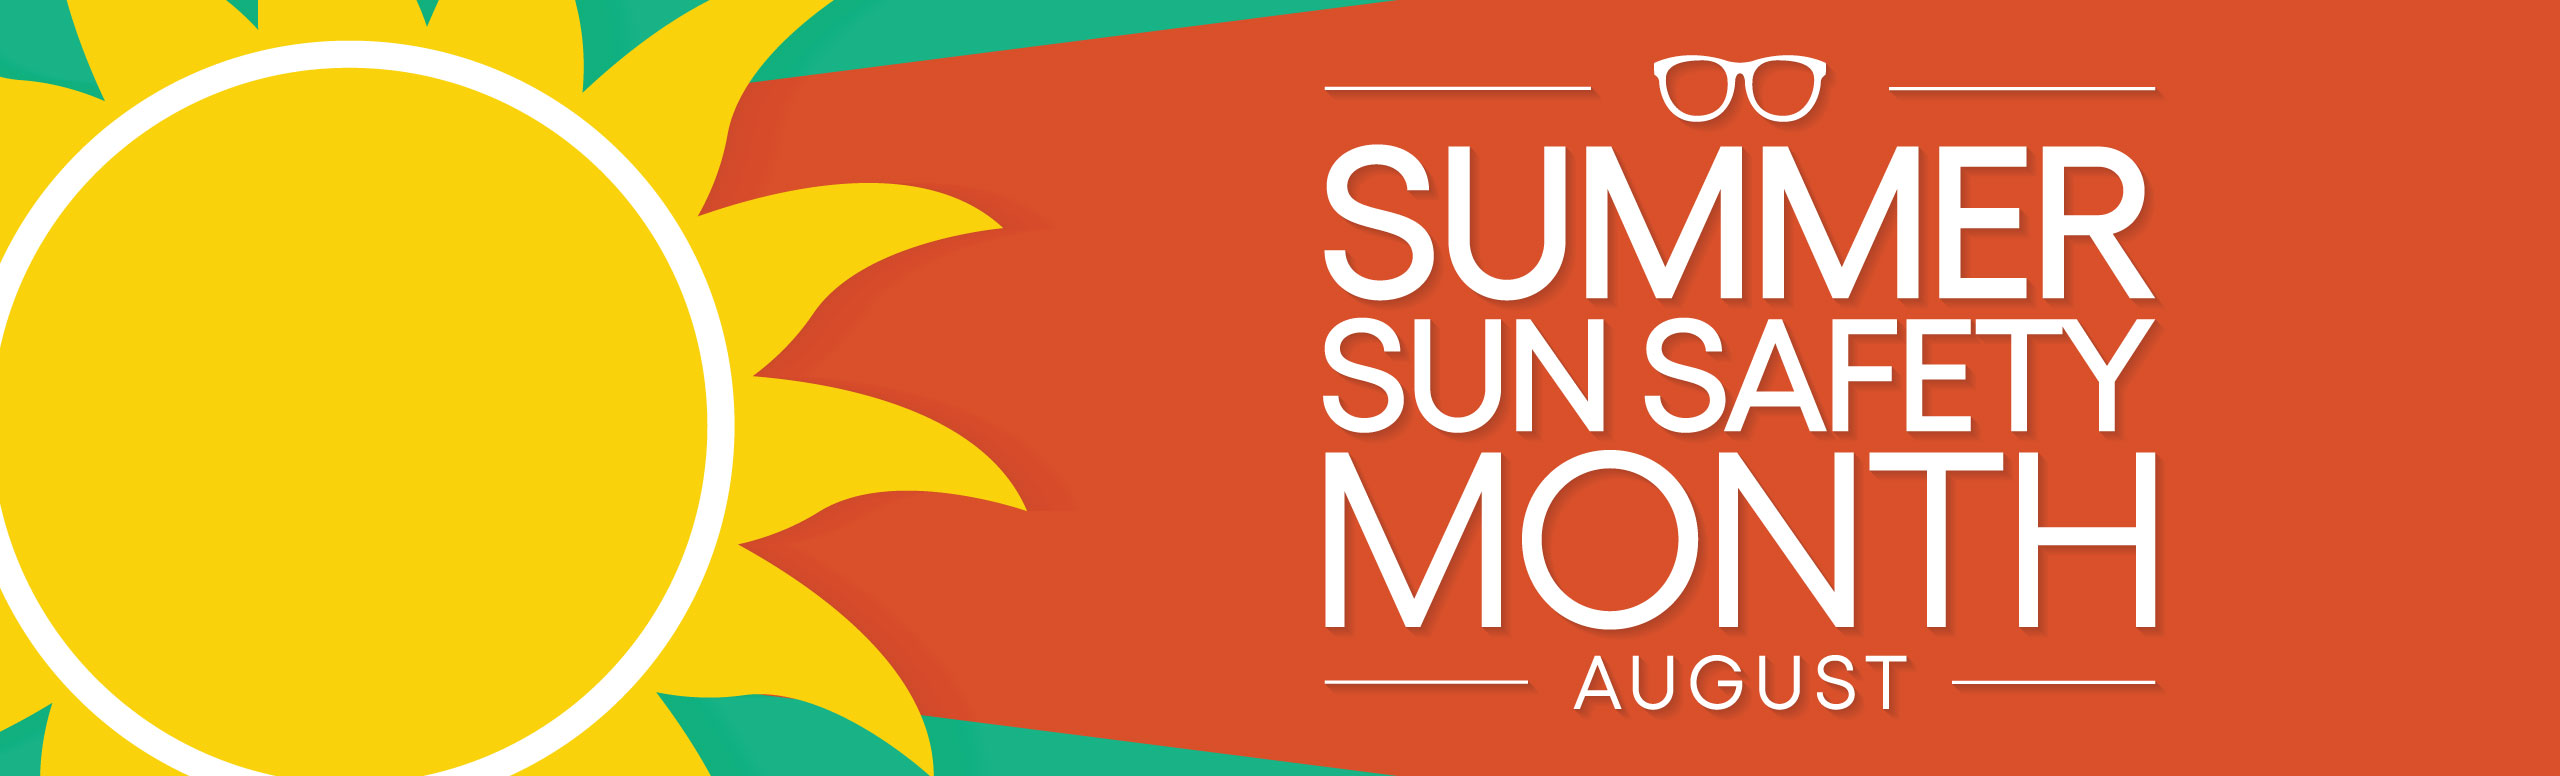 Banner picture of a sun and sunglasses. Banner says:
Summer Sun Safety Month
_August_